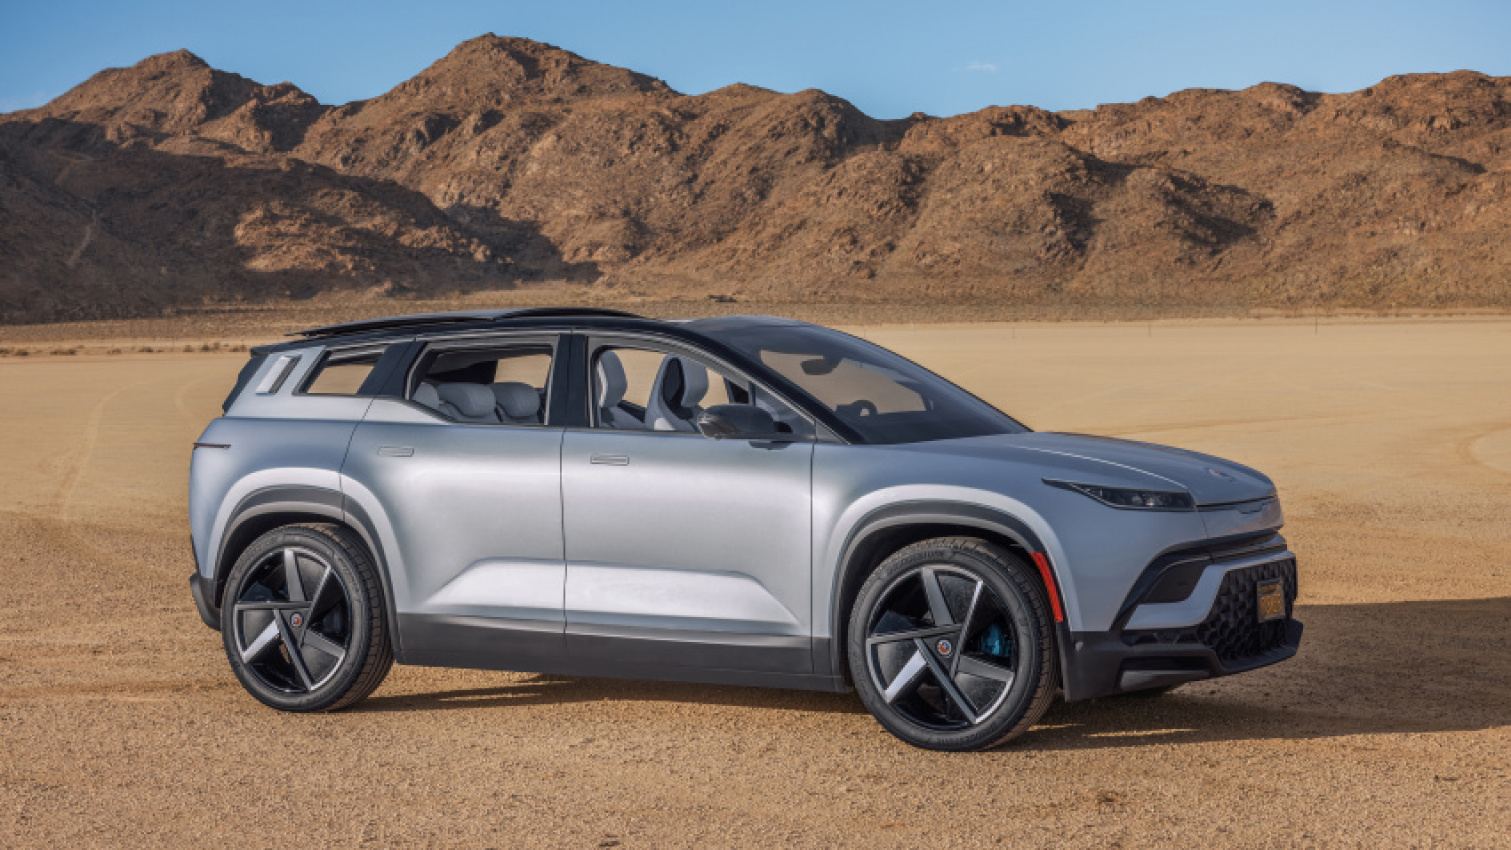 auto, electric vehicle, fisker, gadgets, fisker ocean: 8 things i learnt getting up close with the innovative electric vehicle